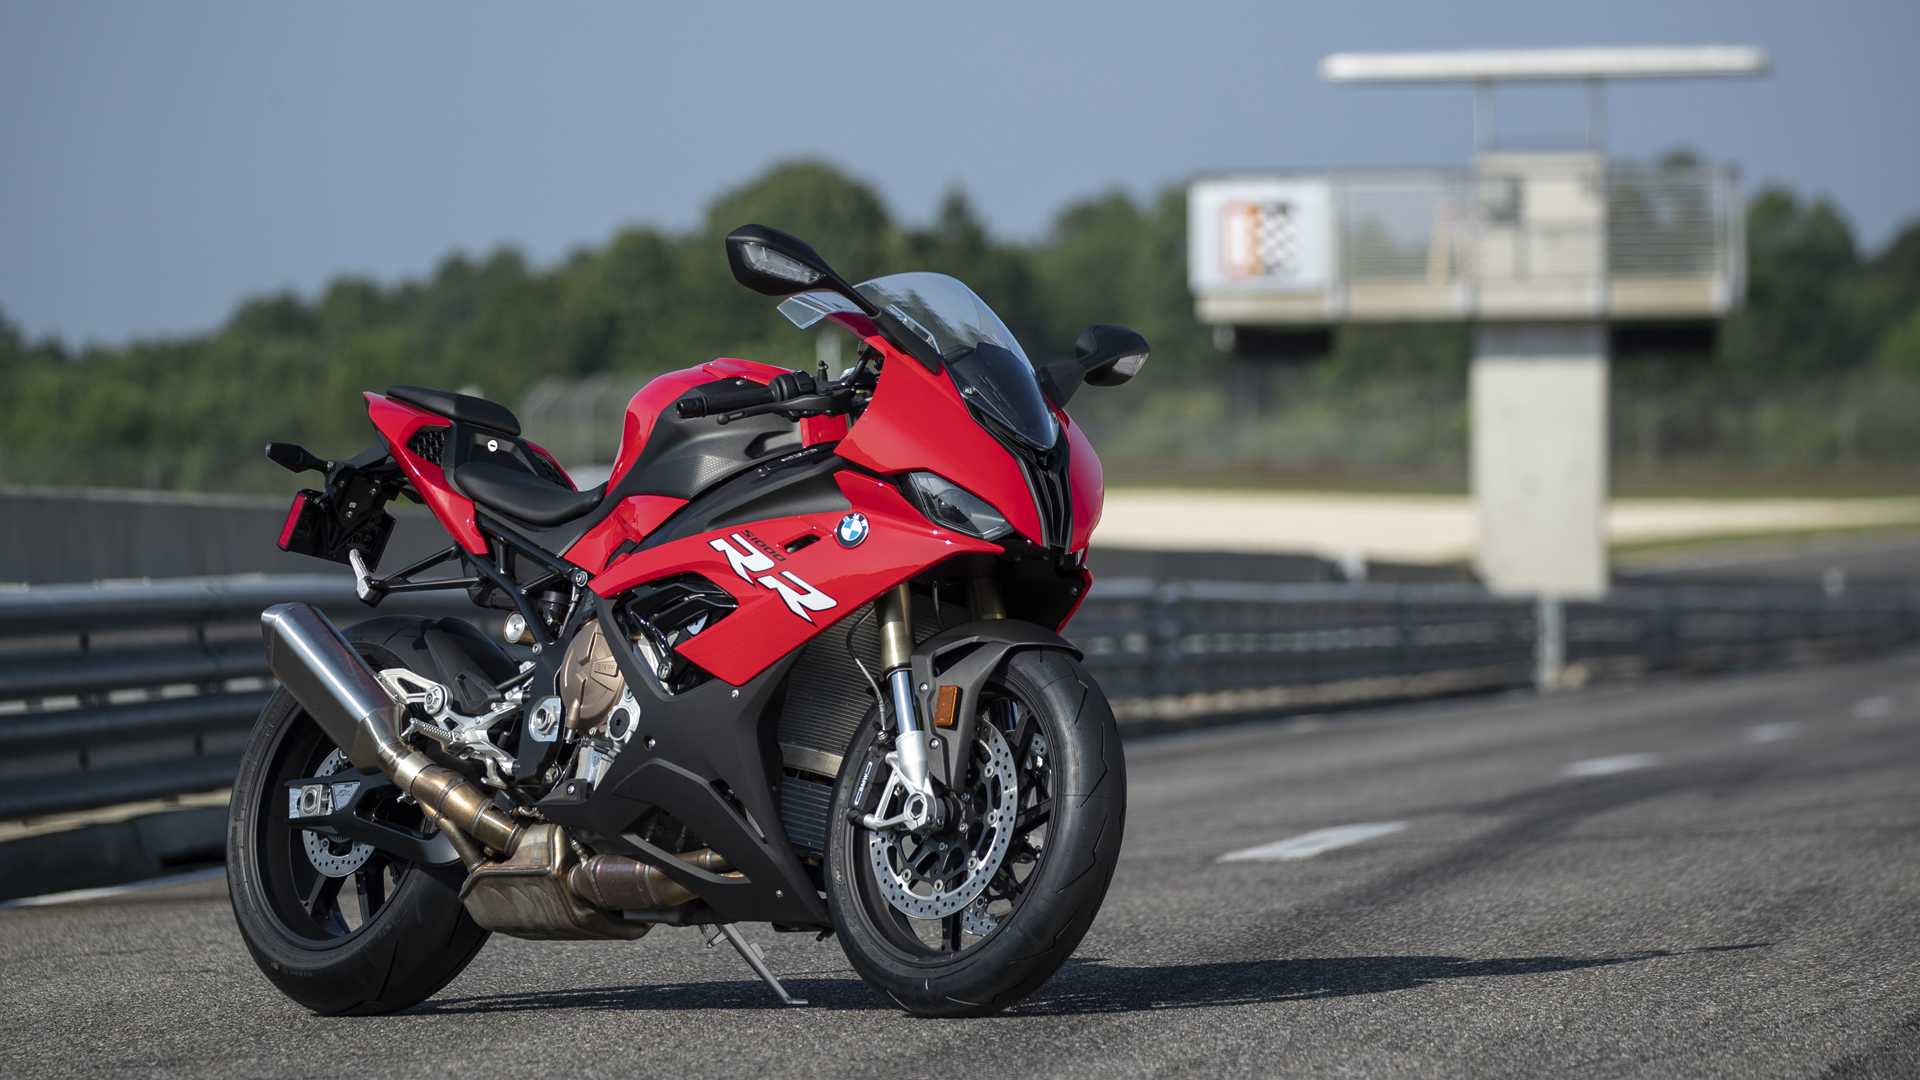 Recall: BMW Issues Two Recalls On S 1000 RR And On K 1600 Line Up